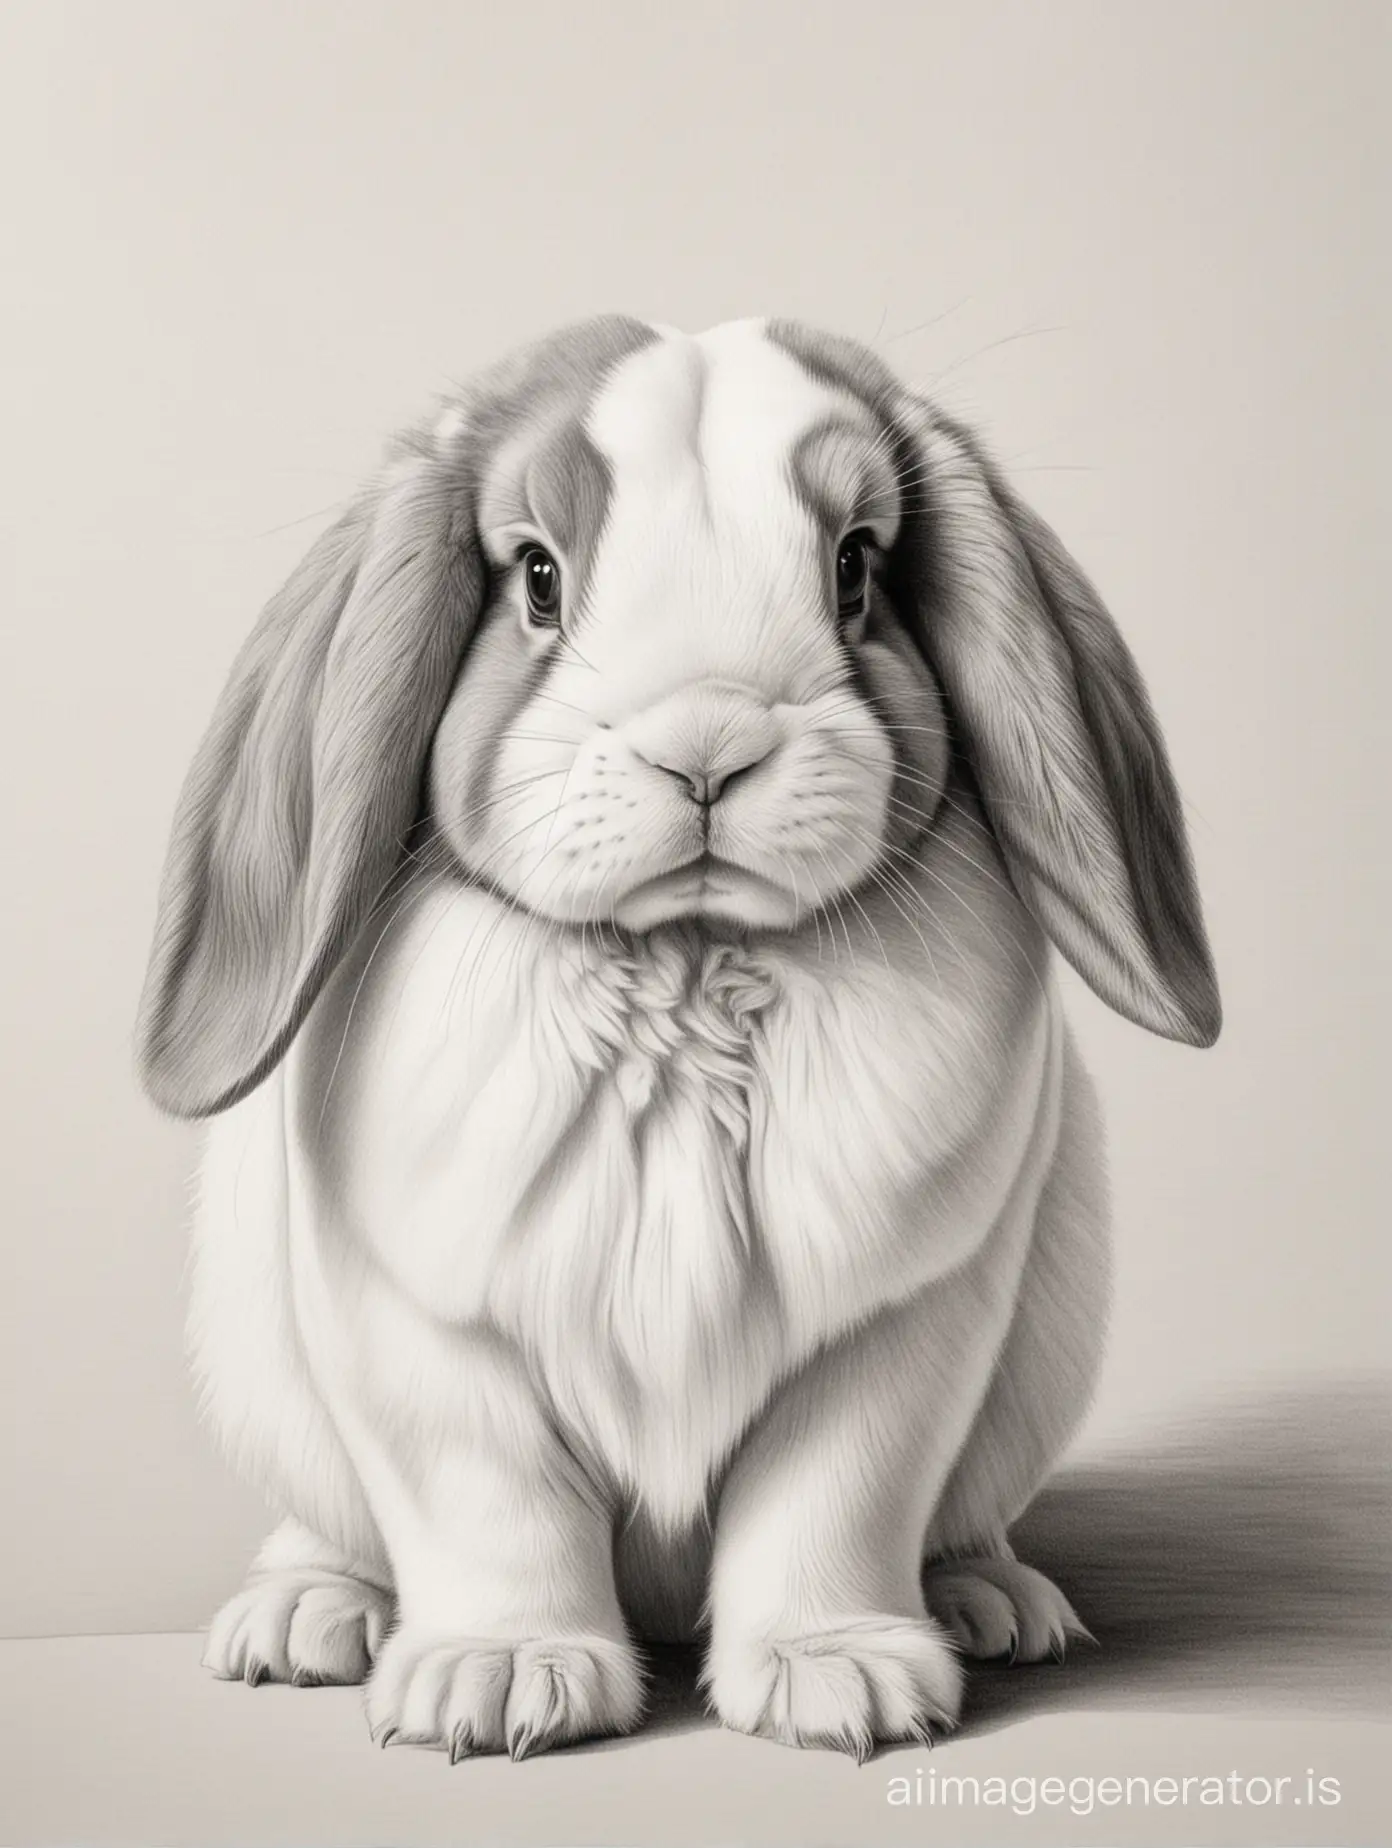 Create an artist's pencil drawing of a Holland Lop bunny looking sideways. Use Picasso's style. Draw in black pencil.